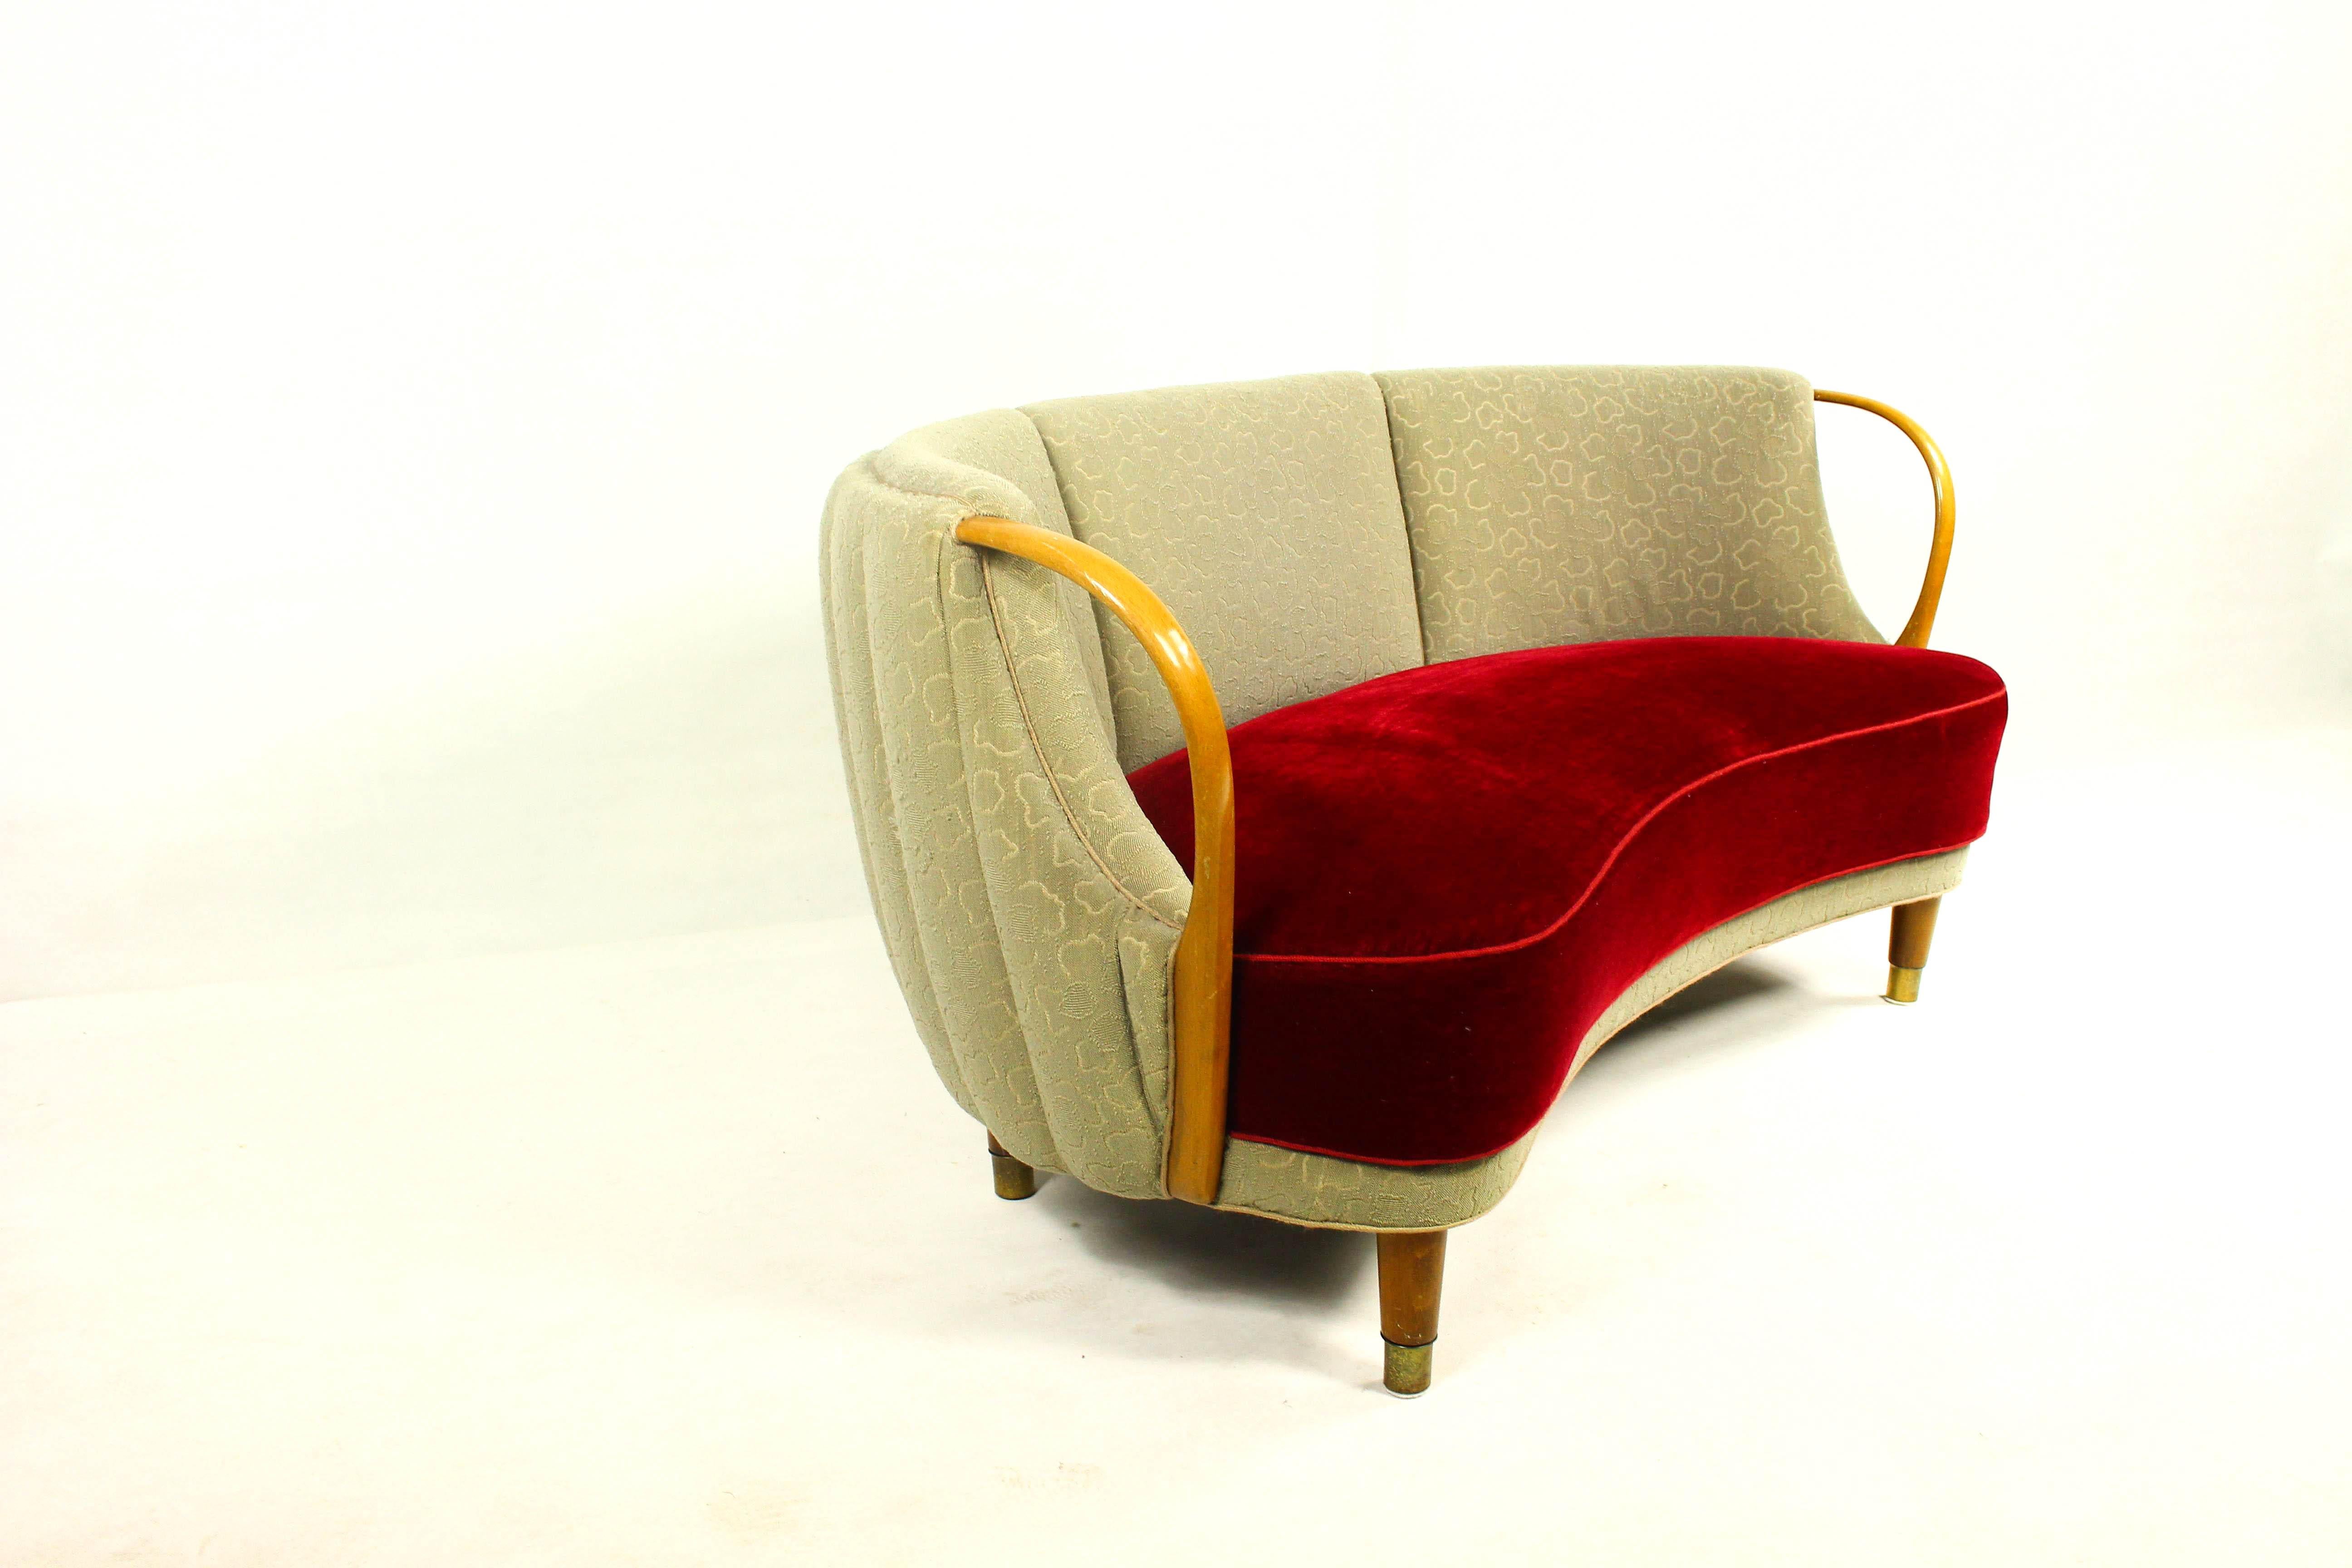 Unique curved or banana shaped loveseat or settee with open armrests designed and made as Model 96 by N.A. Jørgensens Møbelfabrik in 1954/55.

N.A. Jørgensen is better known under the name Bramin Mobler a name they adopted in the 1960s.